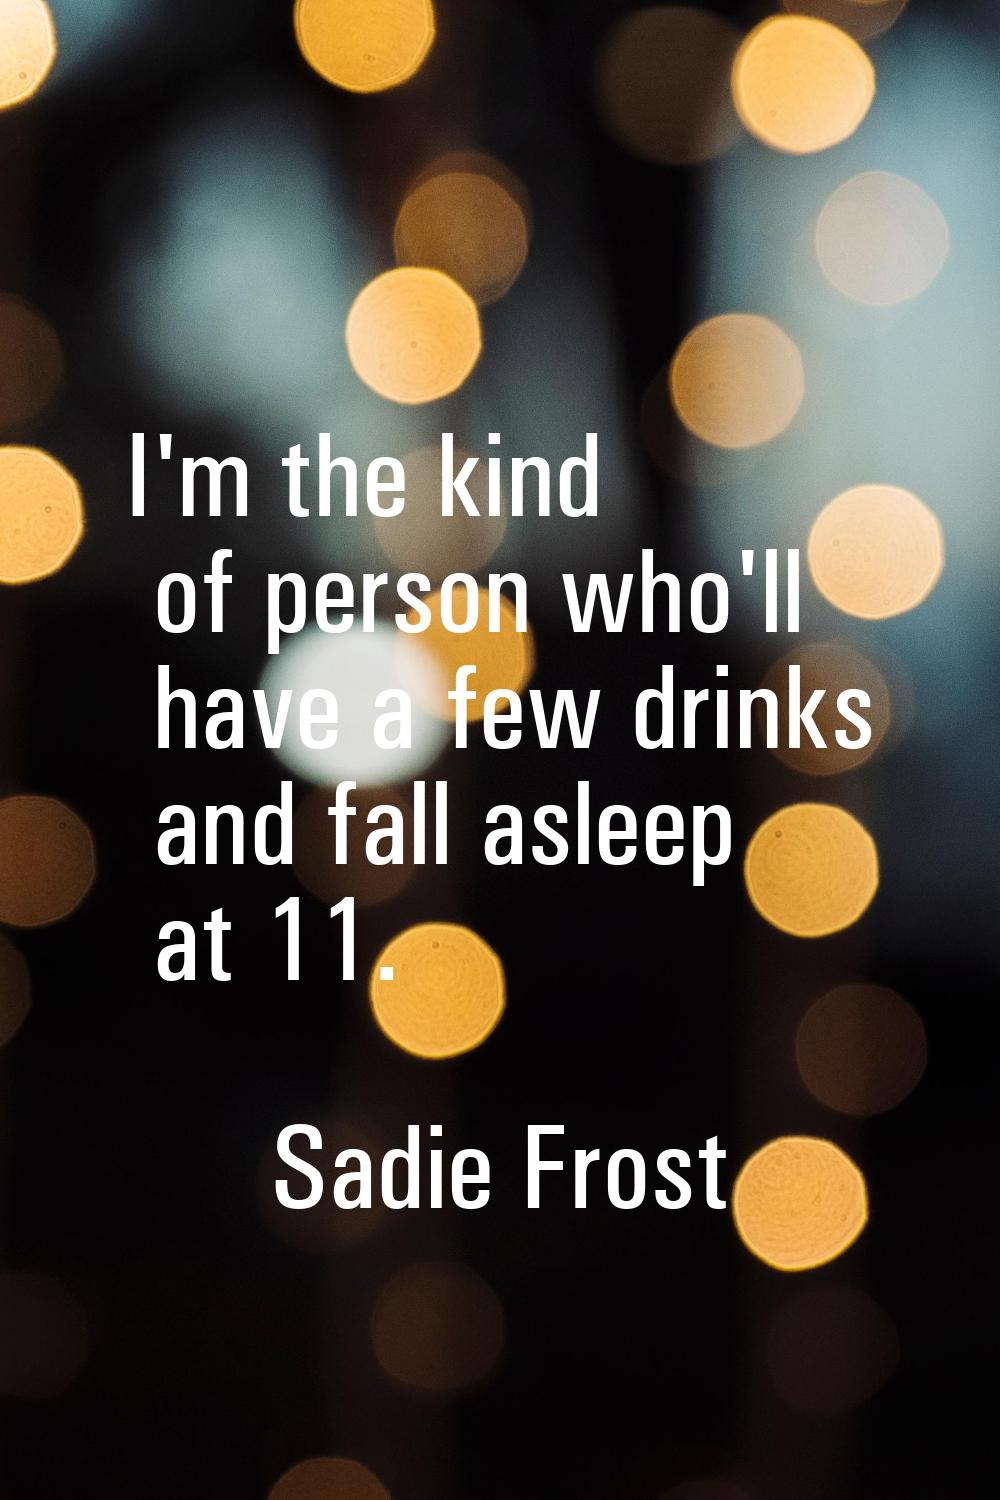 I'm the kind of person who'll have a few drinks and fall asleep at 11.